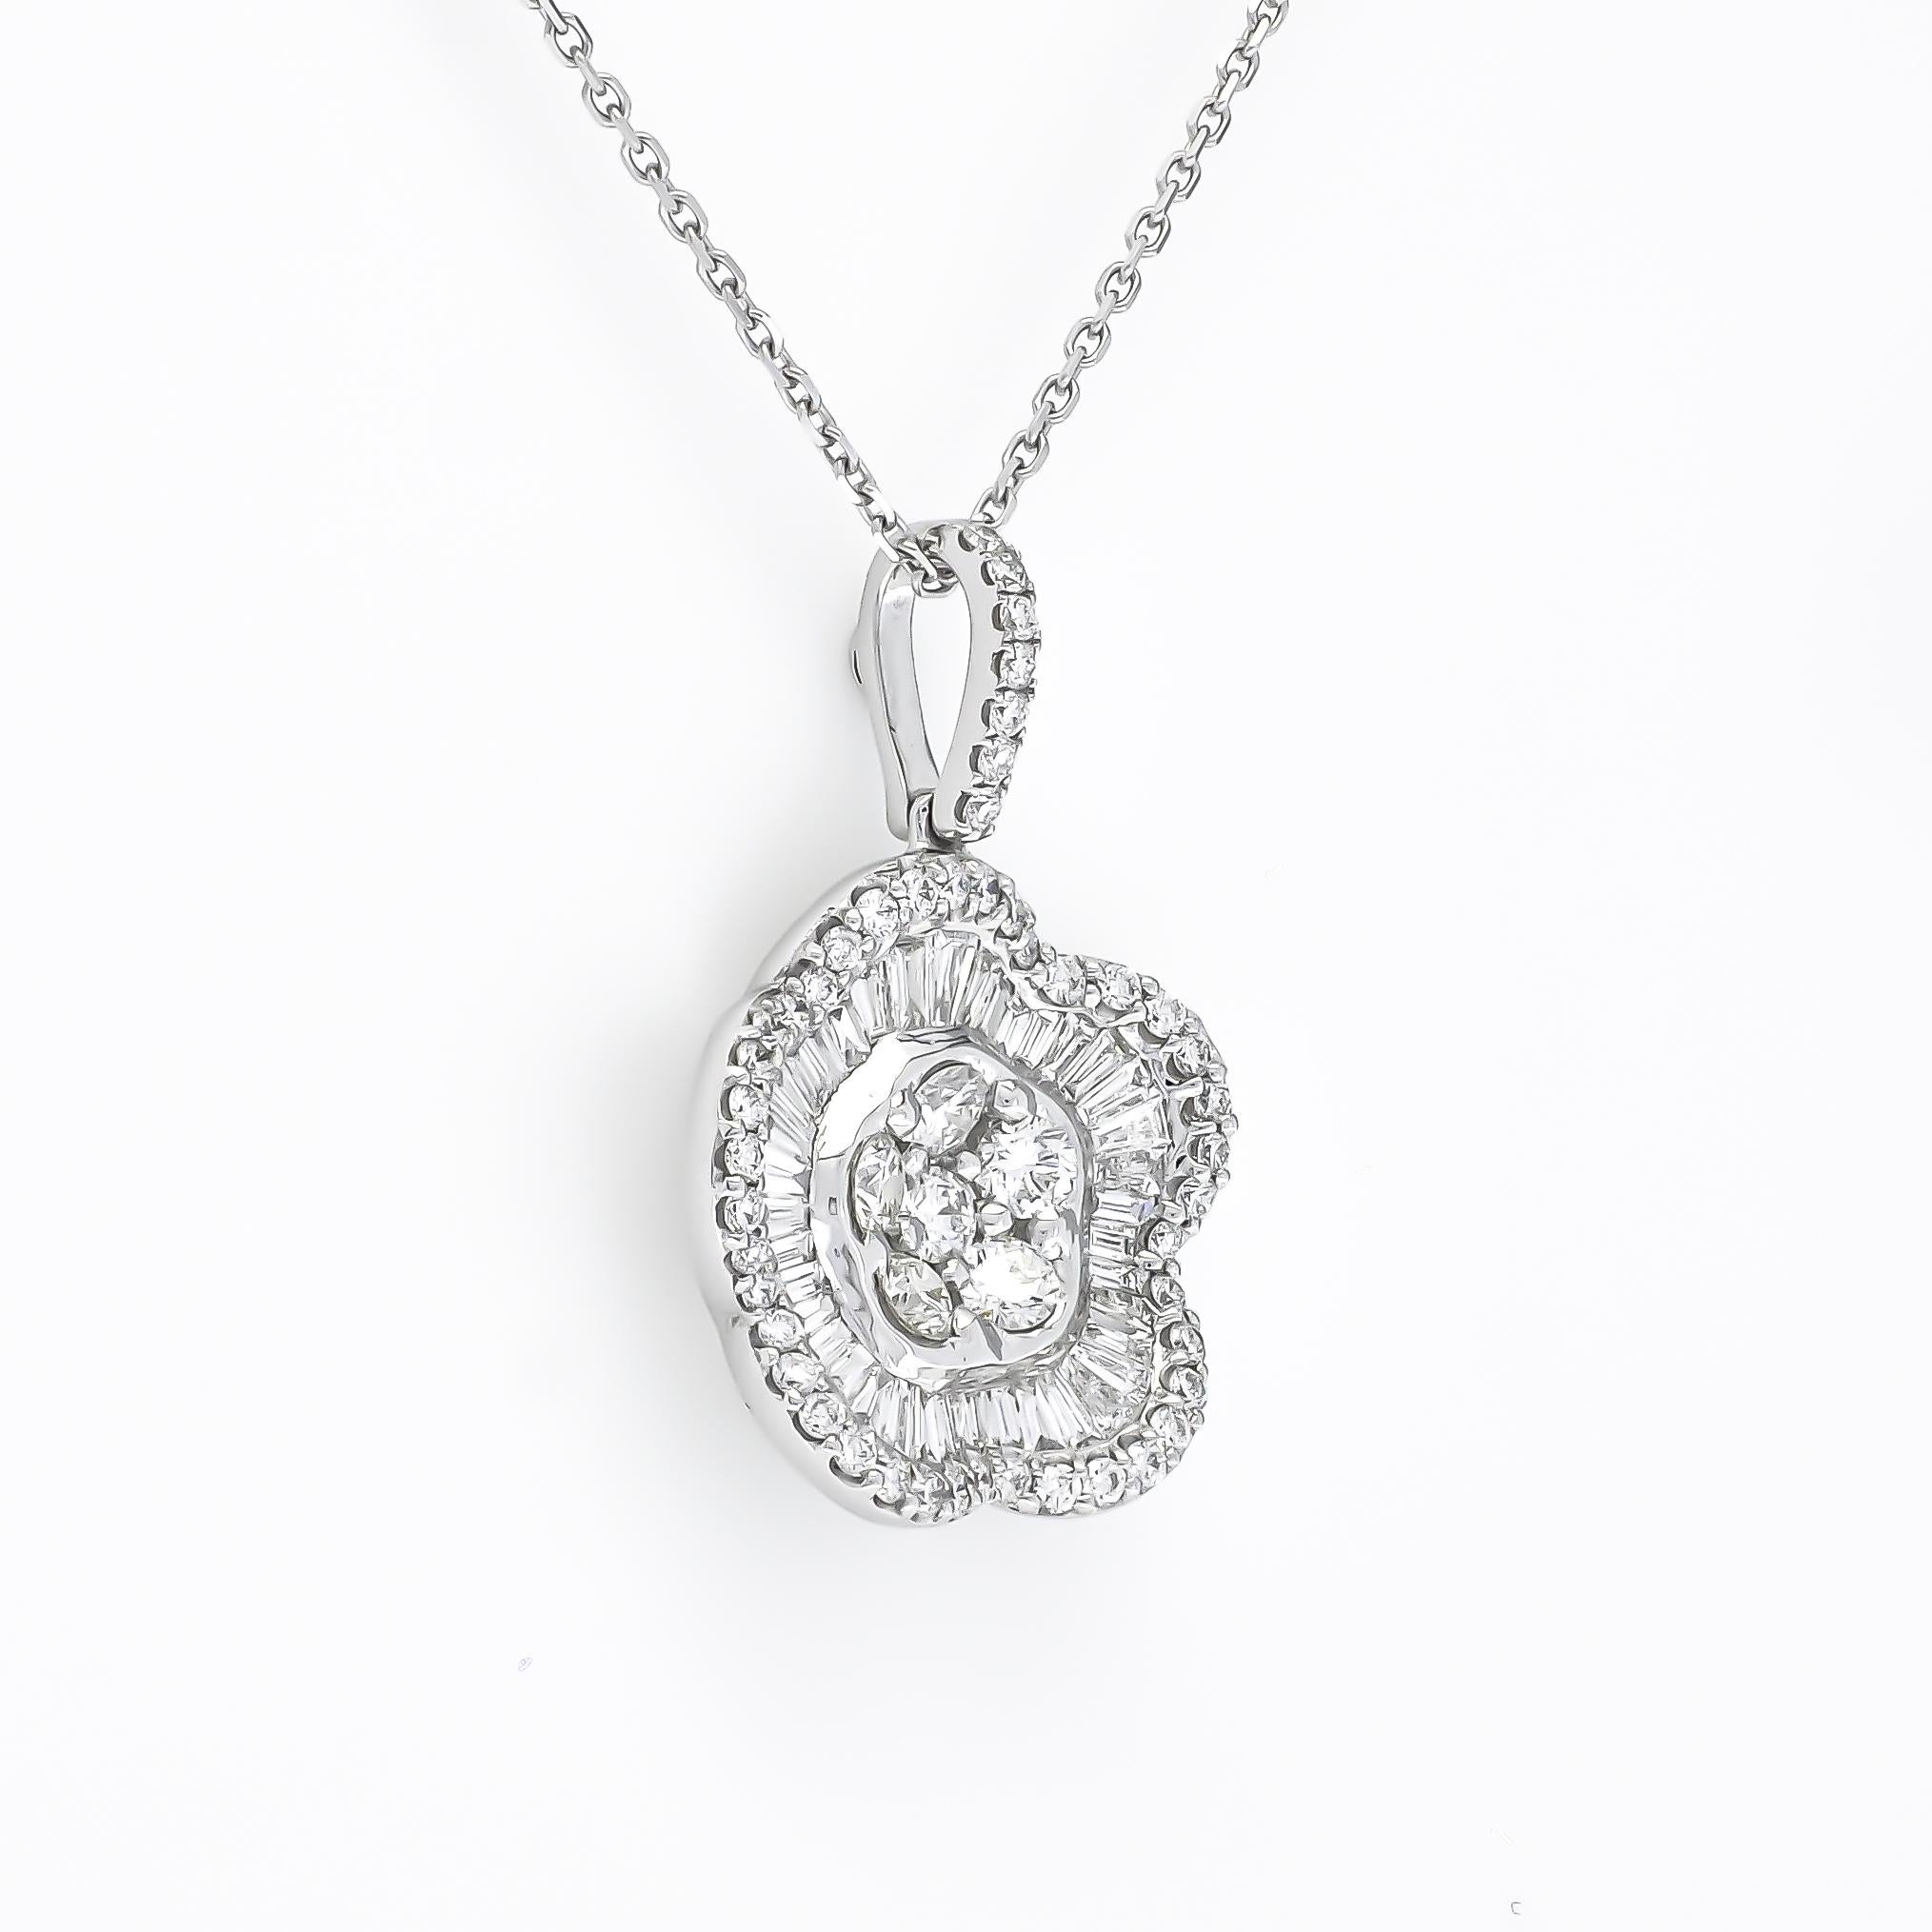 A simple flower pendant necklace is elevated with gorgeous diamonds, set miracle star burst baguette diamond with pave set round diamonds halo for extra shine.


Metal: 18kt White Gold
Gemstone: Natural Diamond
Shape: Round Brilliant/Baguette
Total